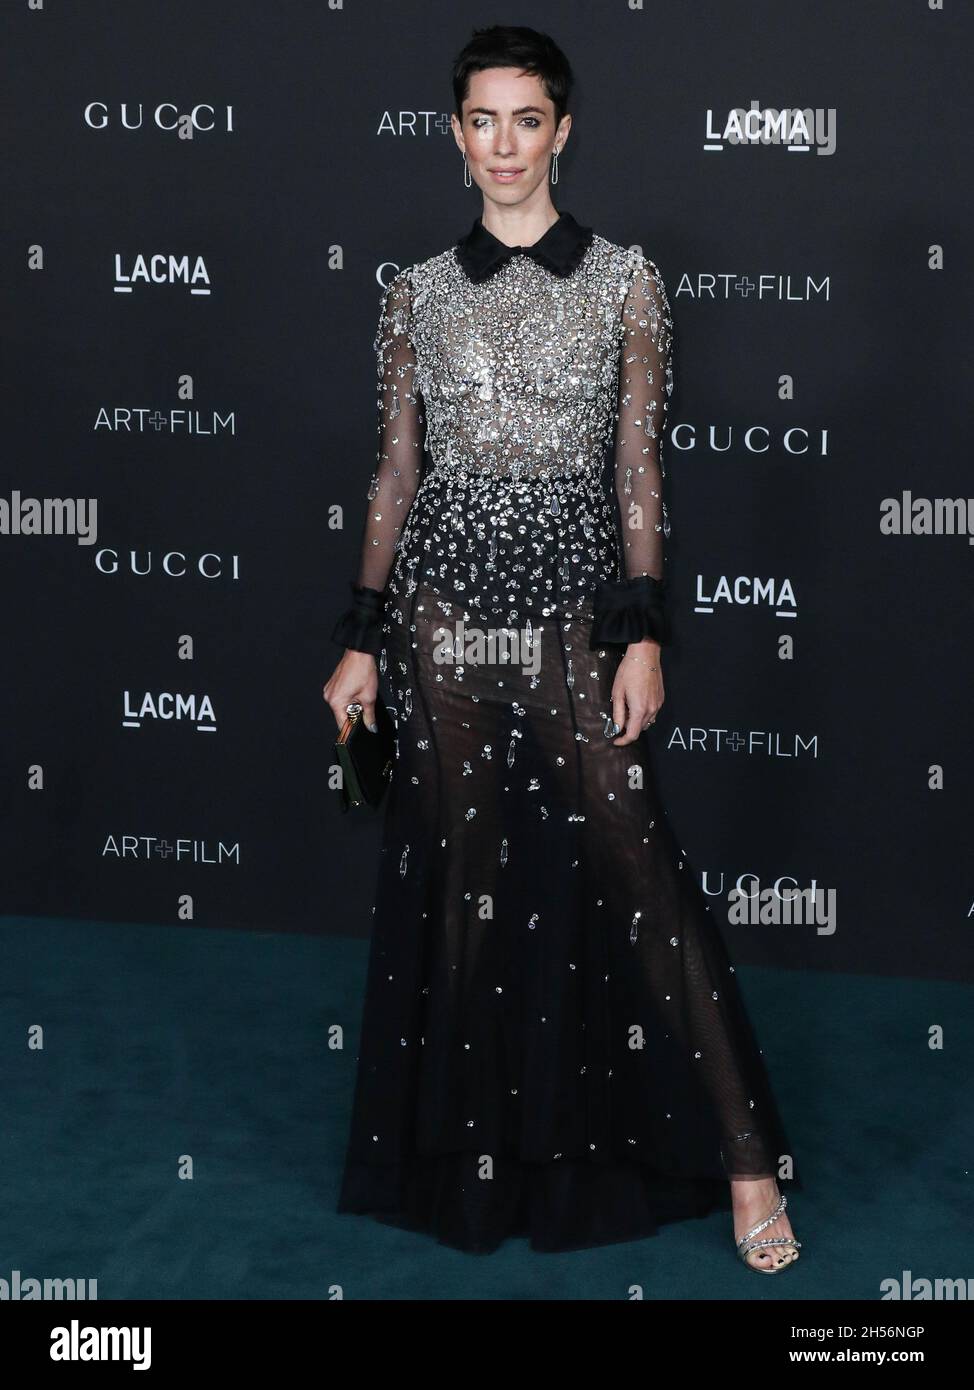 LOS ANGELES, CALIFORNIA, USA - NOVEMBER 06: Actress Rebecca Hall wearing a Miu Miu dress arrives at the 10th Annual LACMA Art + Film Gala 2021 held at the Los Angeles County Museum of Art on November 6, 2021 in Los Angeles, California, United States. (Photo by Xavier Collin/Image Press Agency) Stock Photo